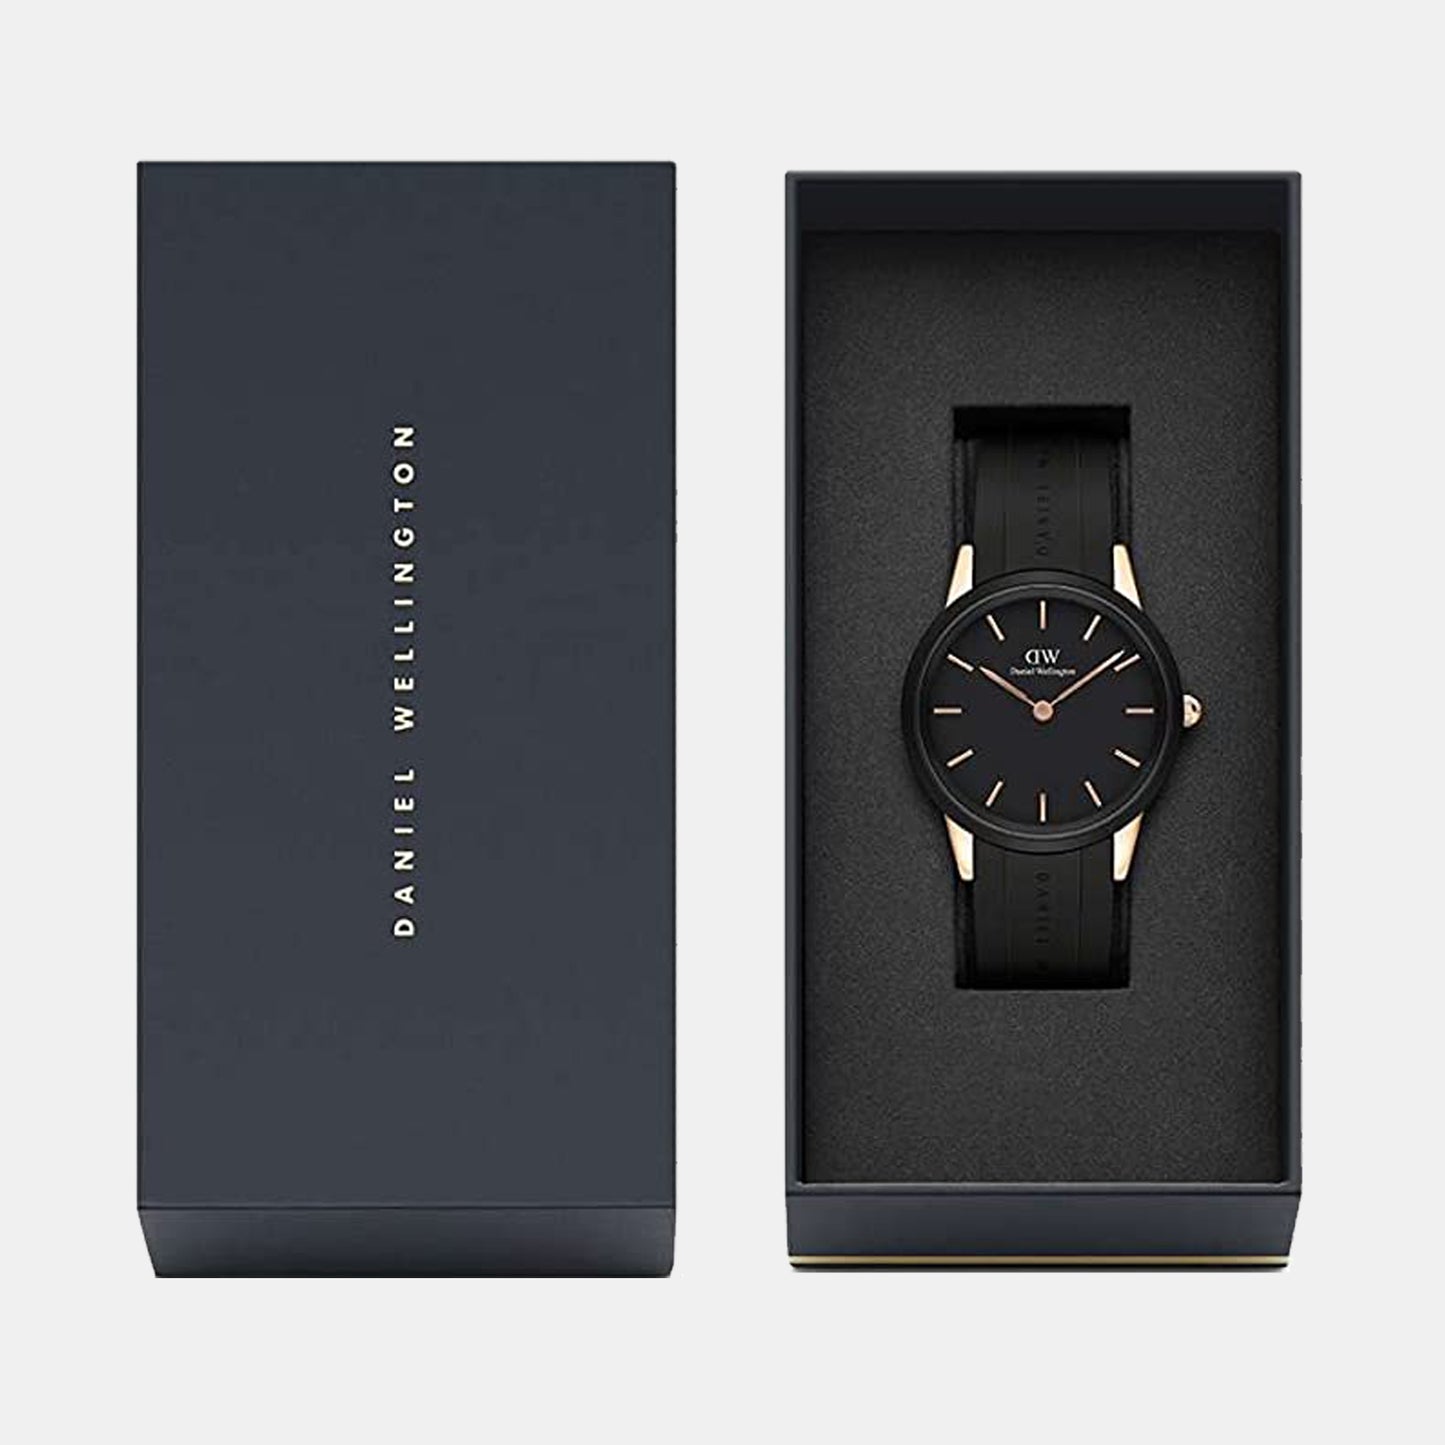 Iconic Male Black Analog Rubber Watch DW00100425